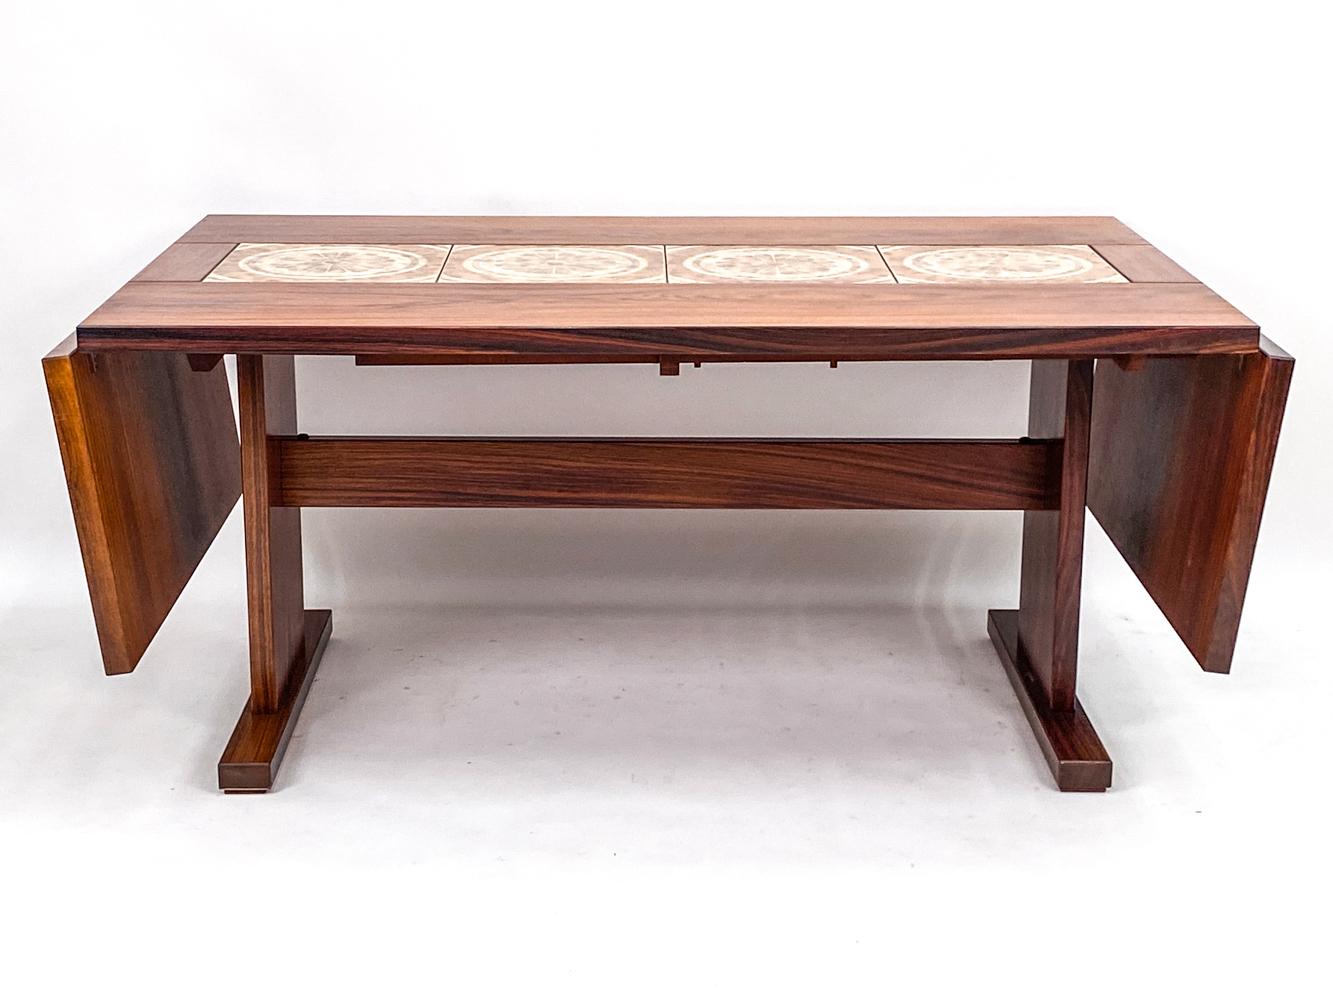 Late 20th Century Danish Modern Ox Art Rosewood & Tile Dining Table